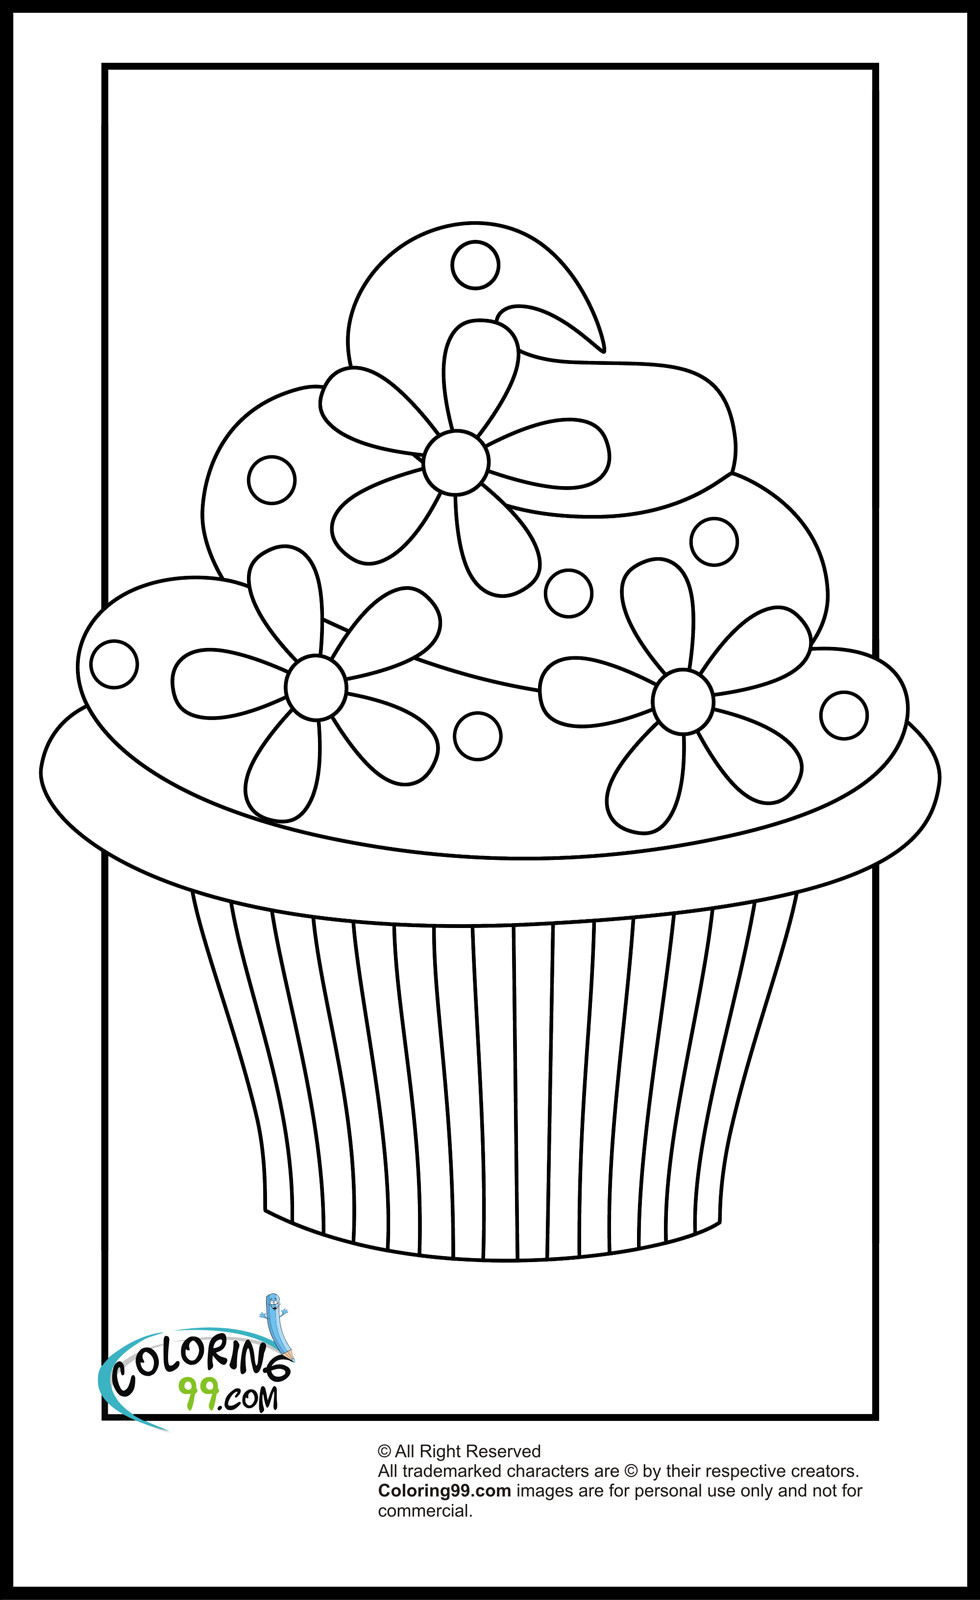 Free Printable Kids Coloring Pages
 Cupcake Coloring Pages